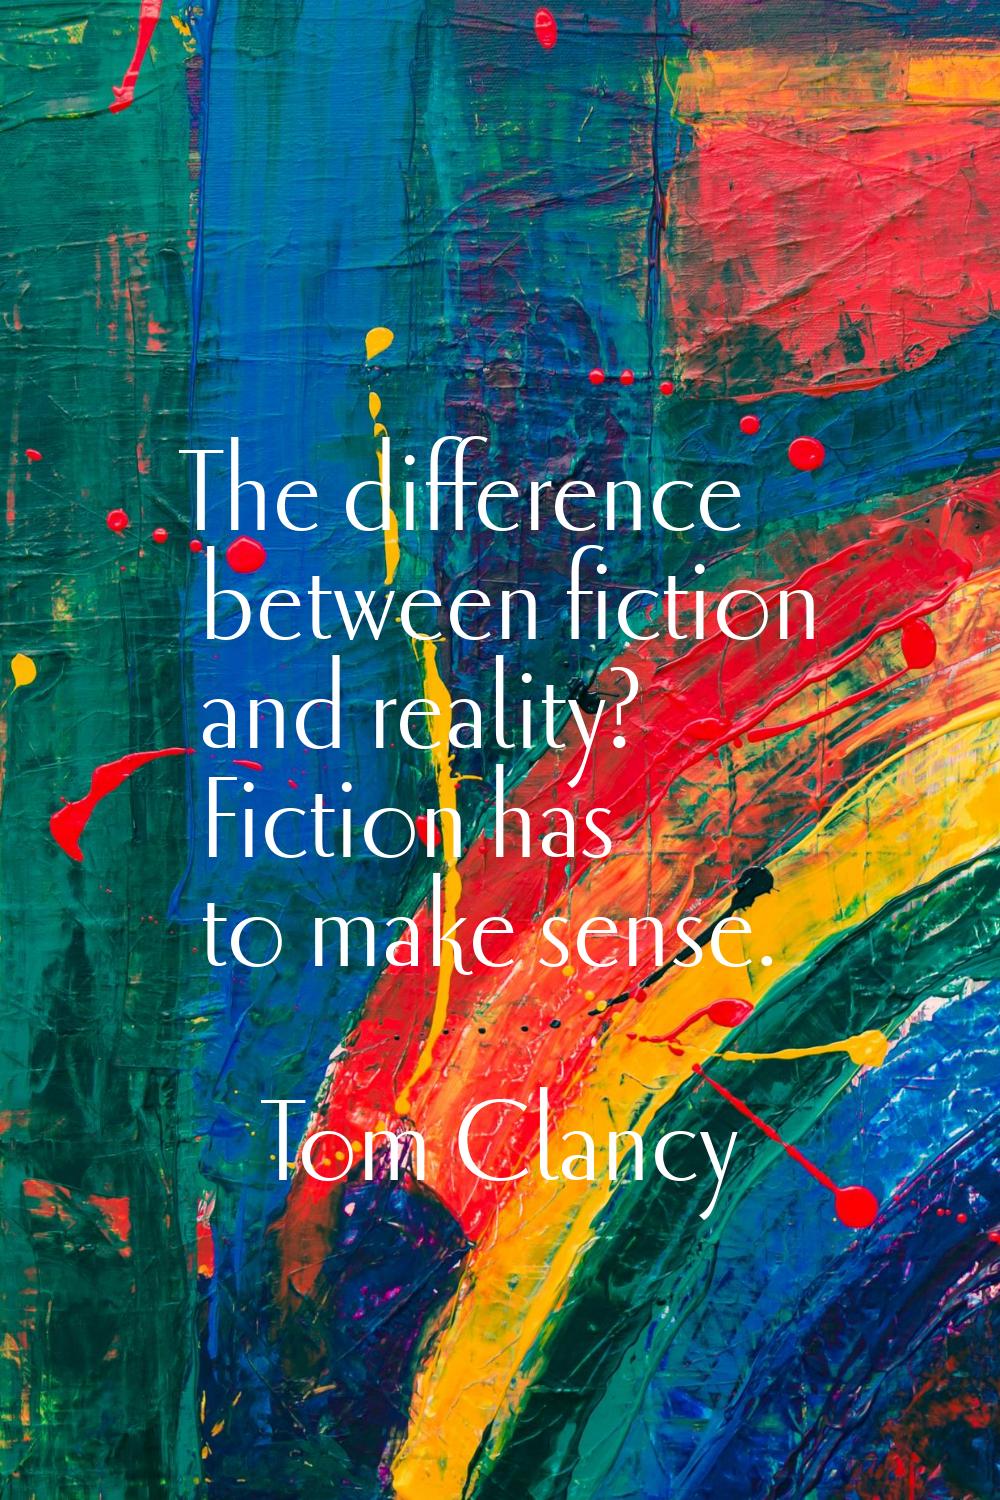 The difference between fiction and reality? Fiction has to make sense.